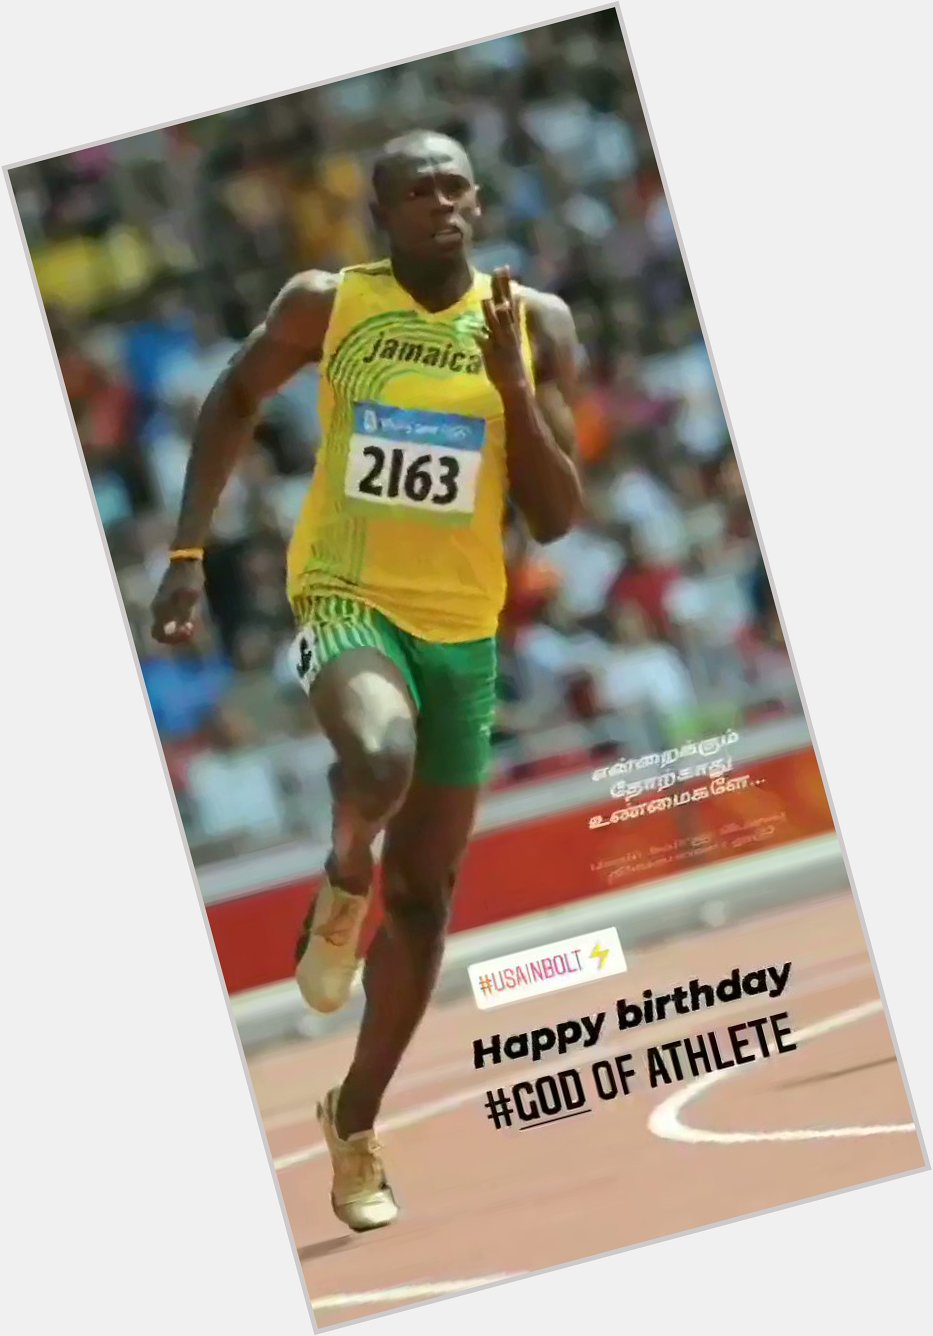 Happy birthday....
USAIN BOLT....    You are the one and only
Most inspiring in my 
Life THalIVAR  